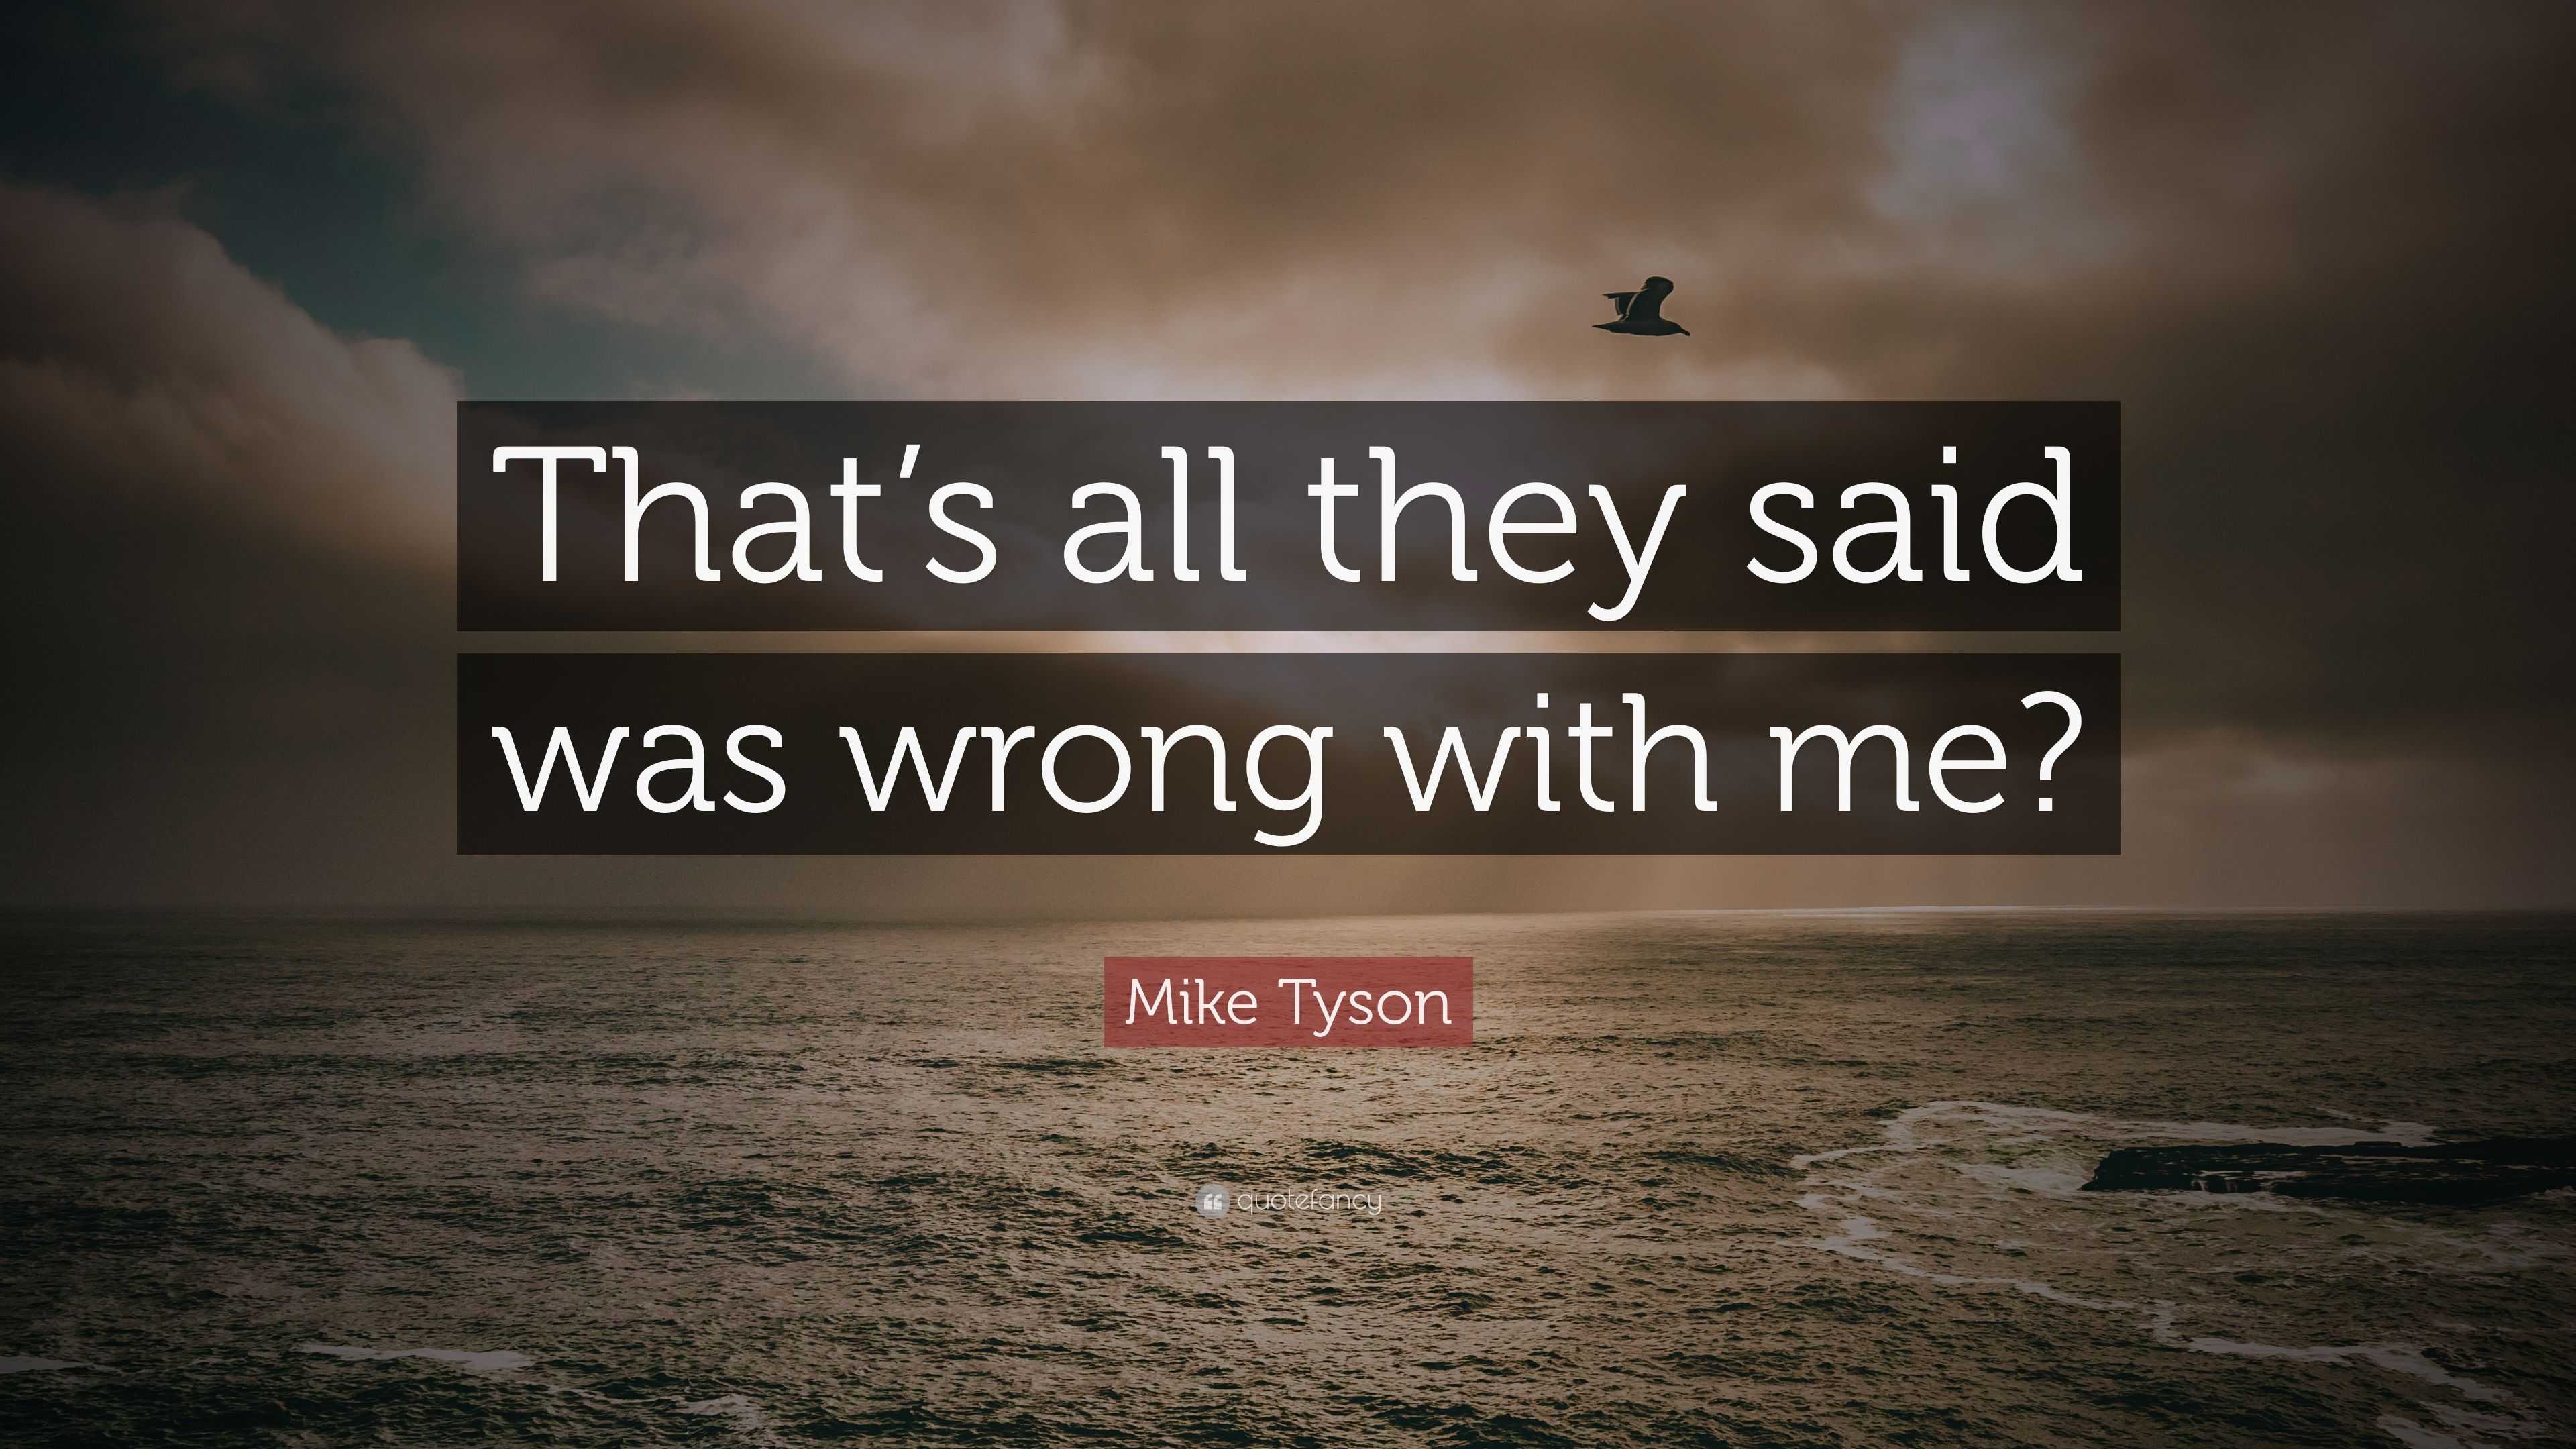 Mike Tyson Quote: “That’s all they said was wrong with me?”